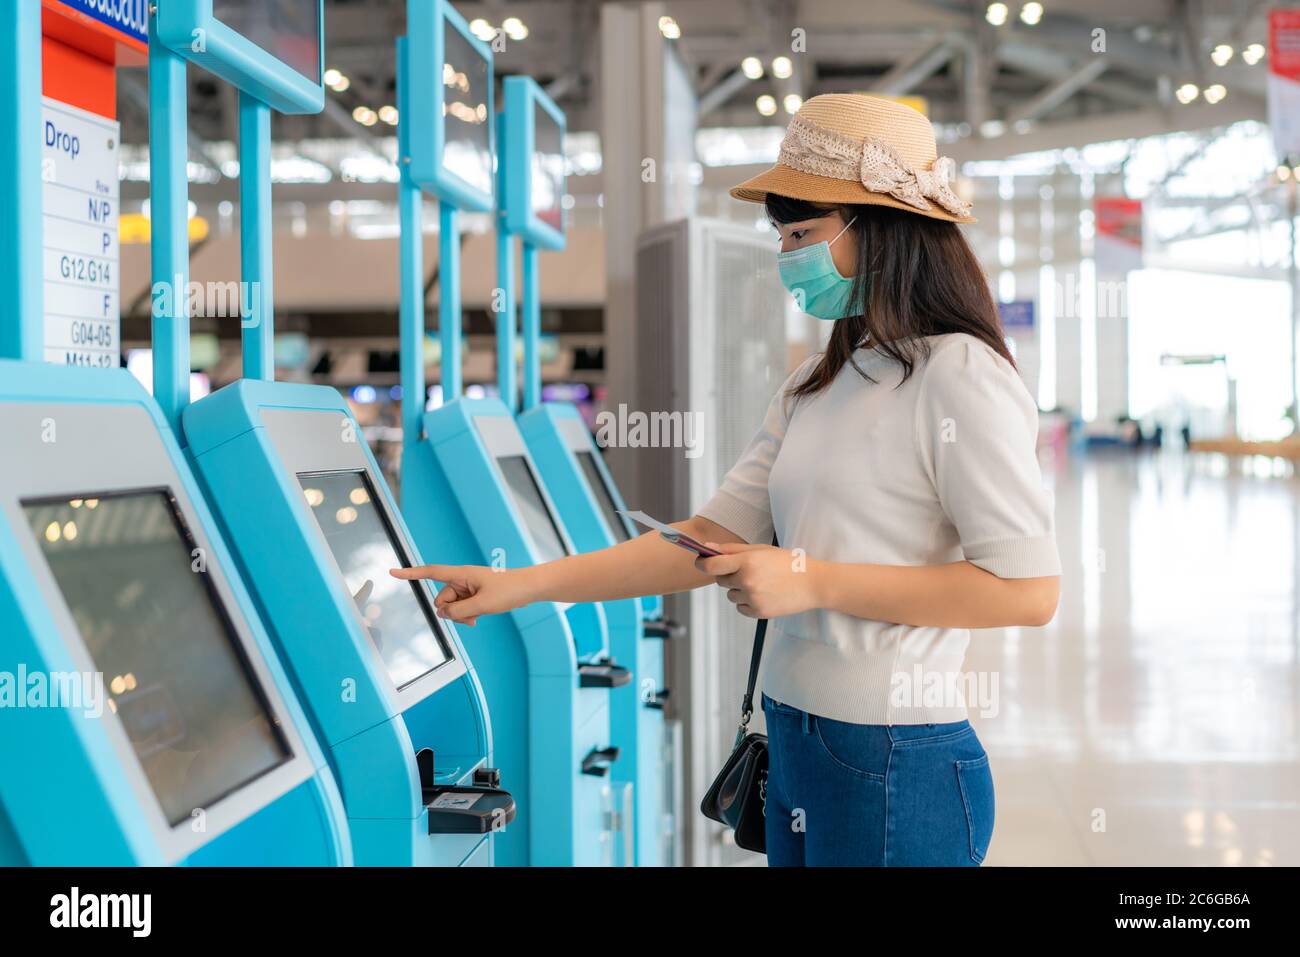 Asian woman traverler wearing mask using self check-in kiosk in airport terminal during coronavirus (COVID-19) pandemic prevention when travel abroad. Stock Photo